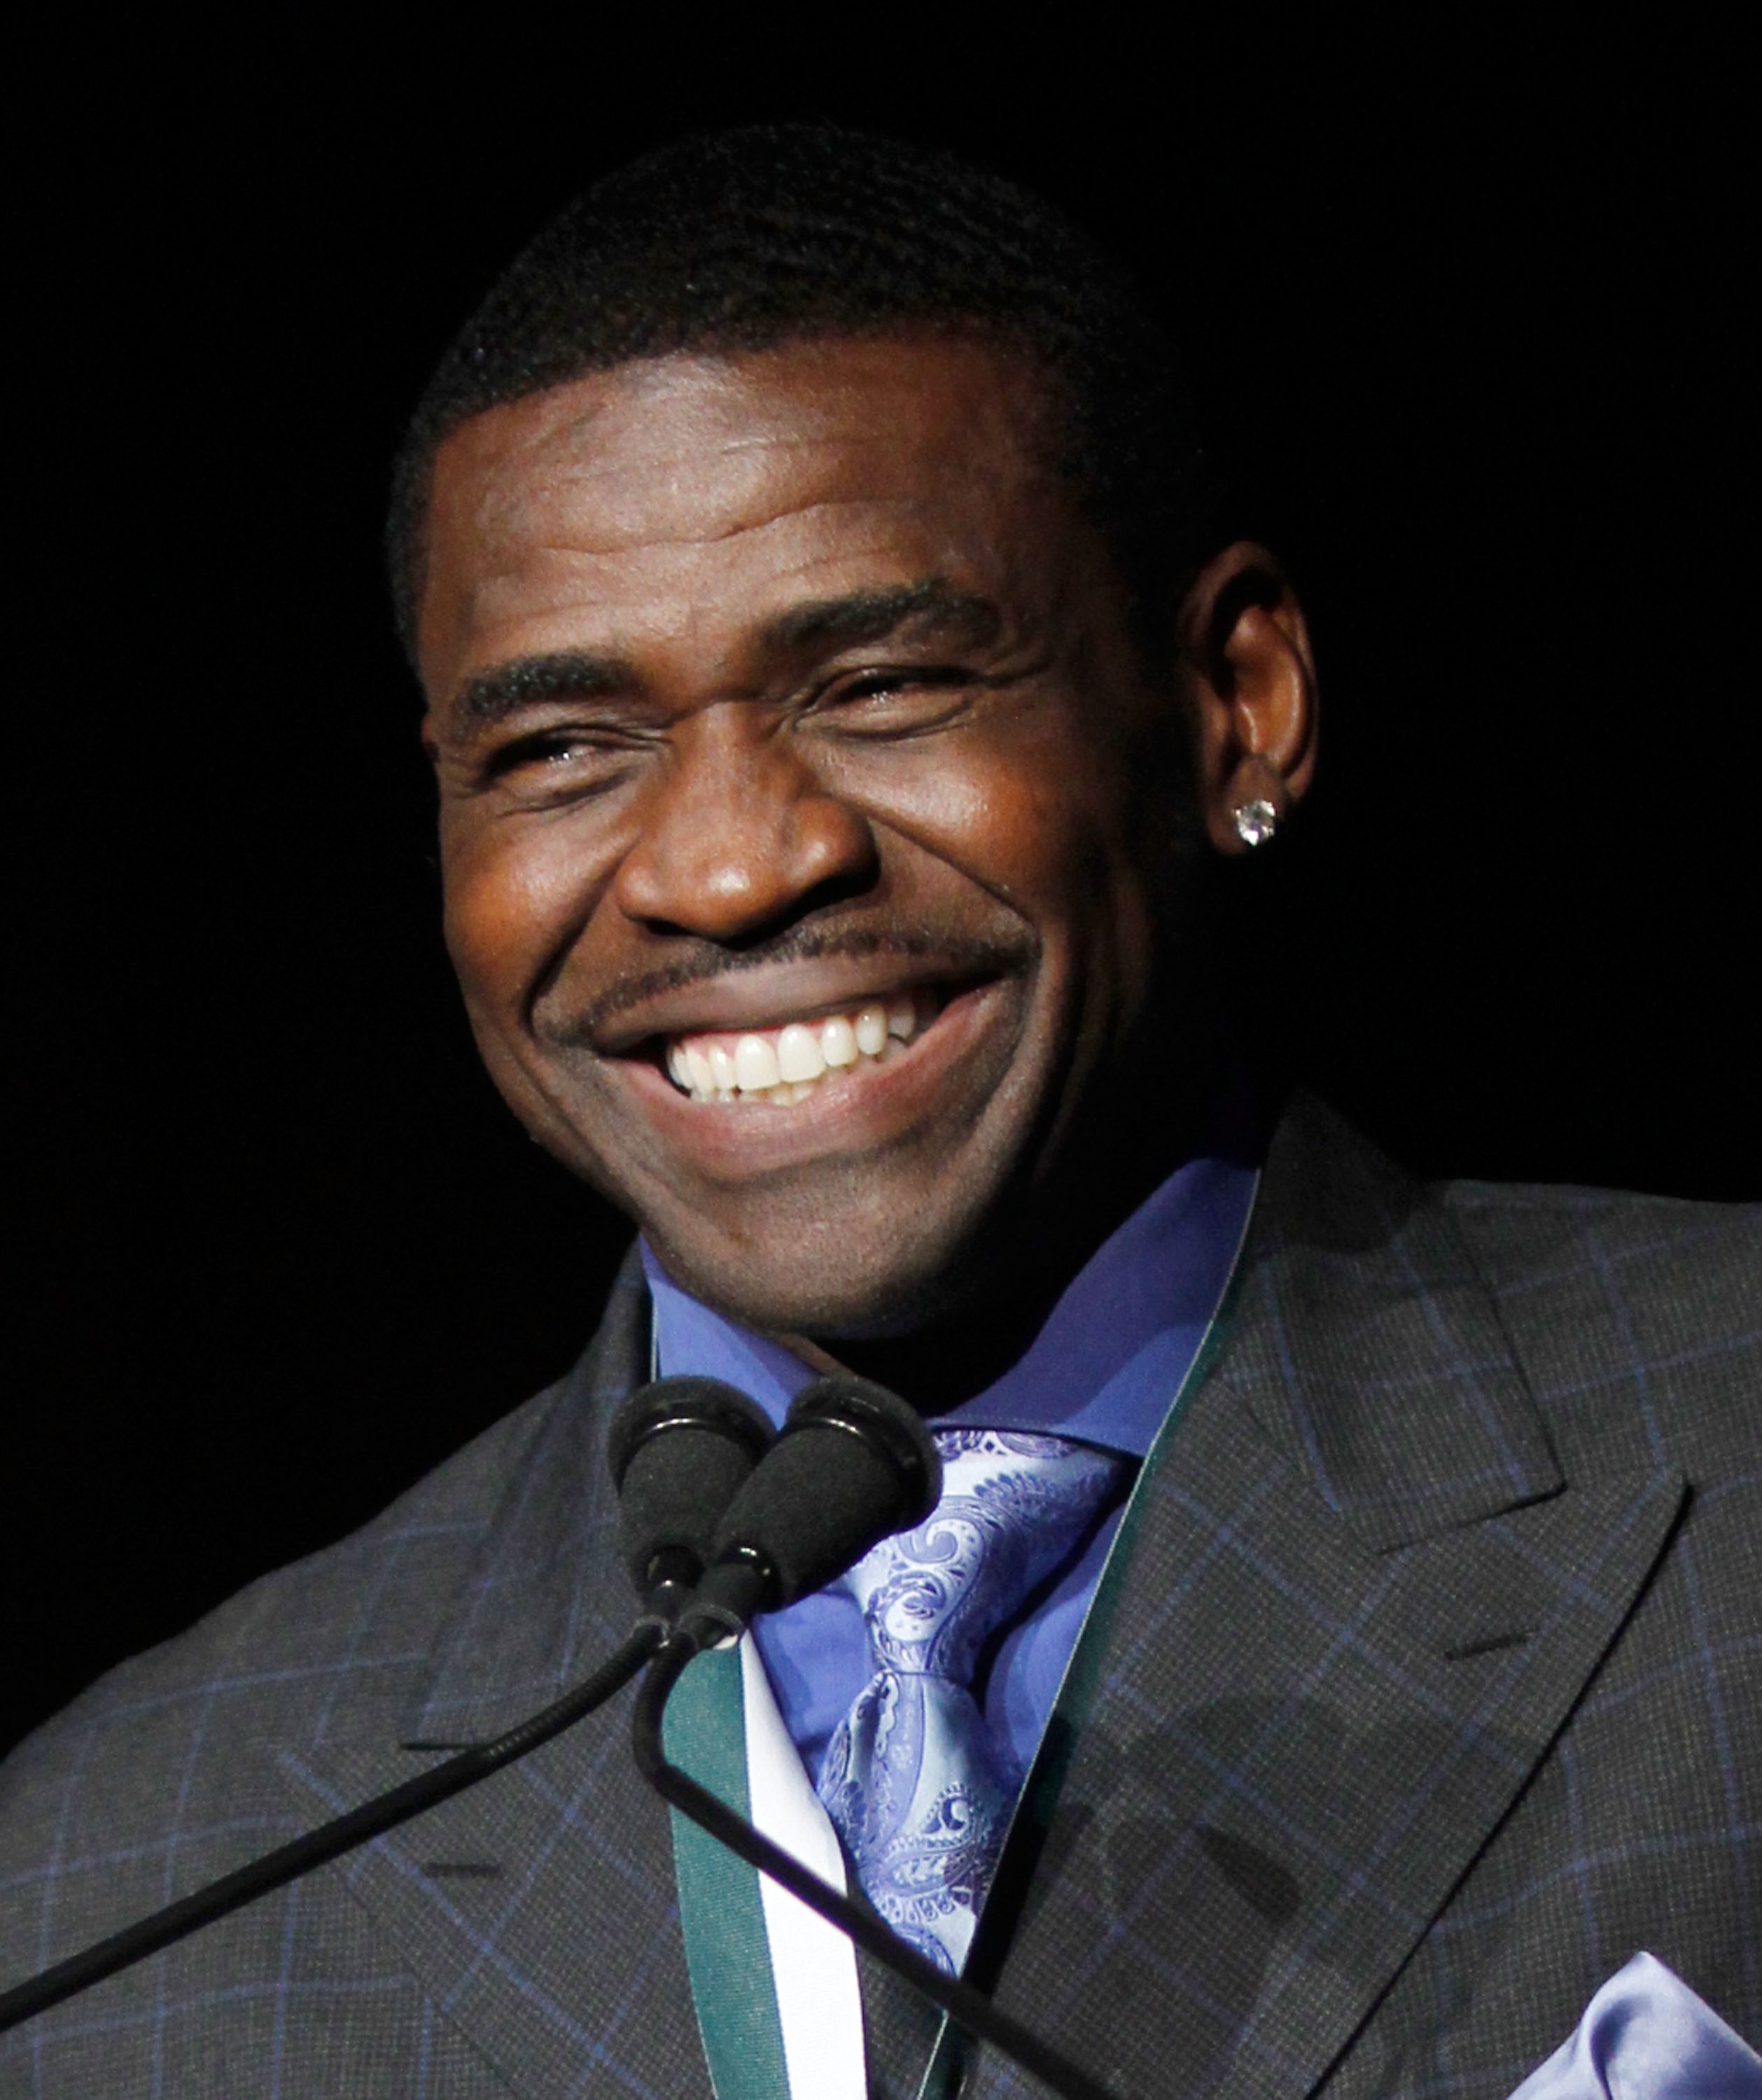 NEW YORK - SEPTEMBER 27:  Former NFL player Michael Irvin speaks during the 25th Great Sports Legends Dinner to benefit The Buoniconti Fund to Cure Paralysis at The Waldorf=Astoria on September 27, 2010 in New York City.  (Photo by Thos Robinson/Getty Ima